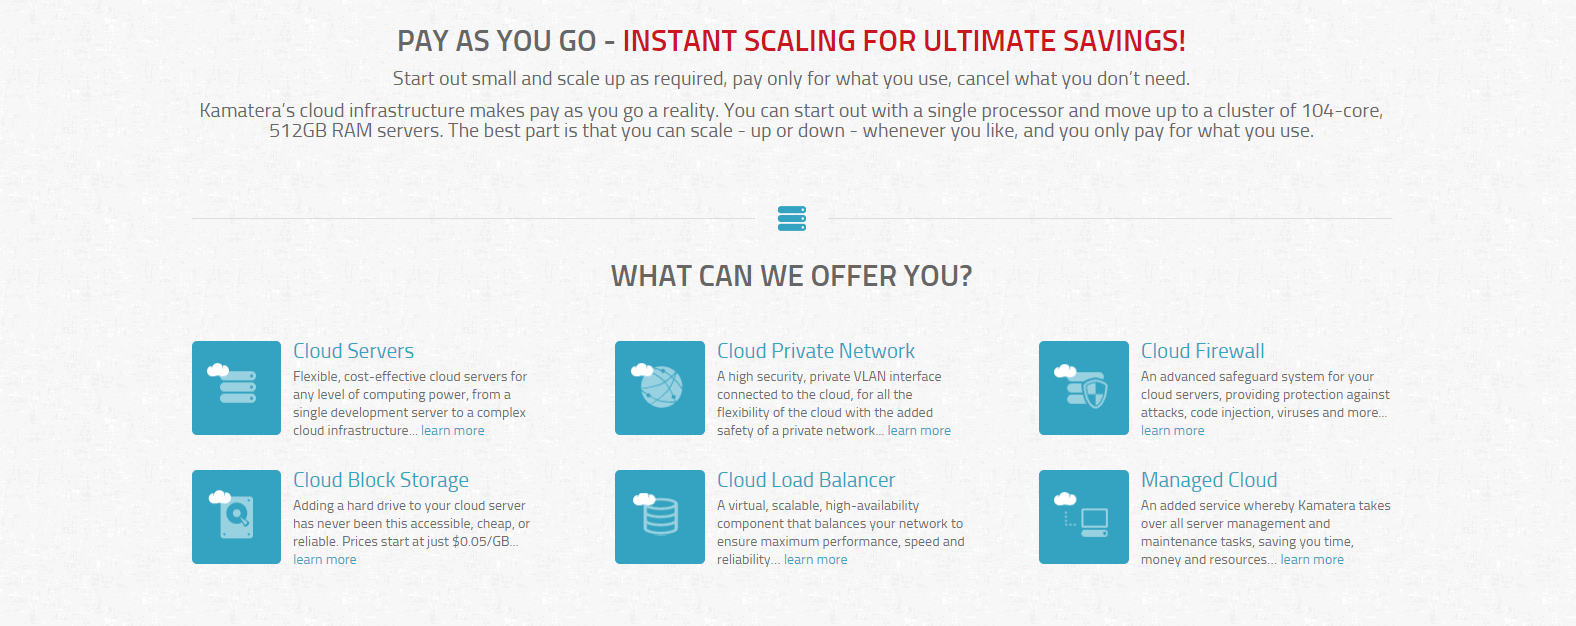 Kamatera's reseller hosting features